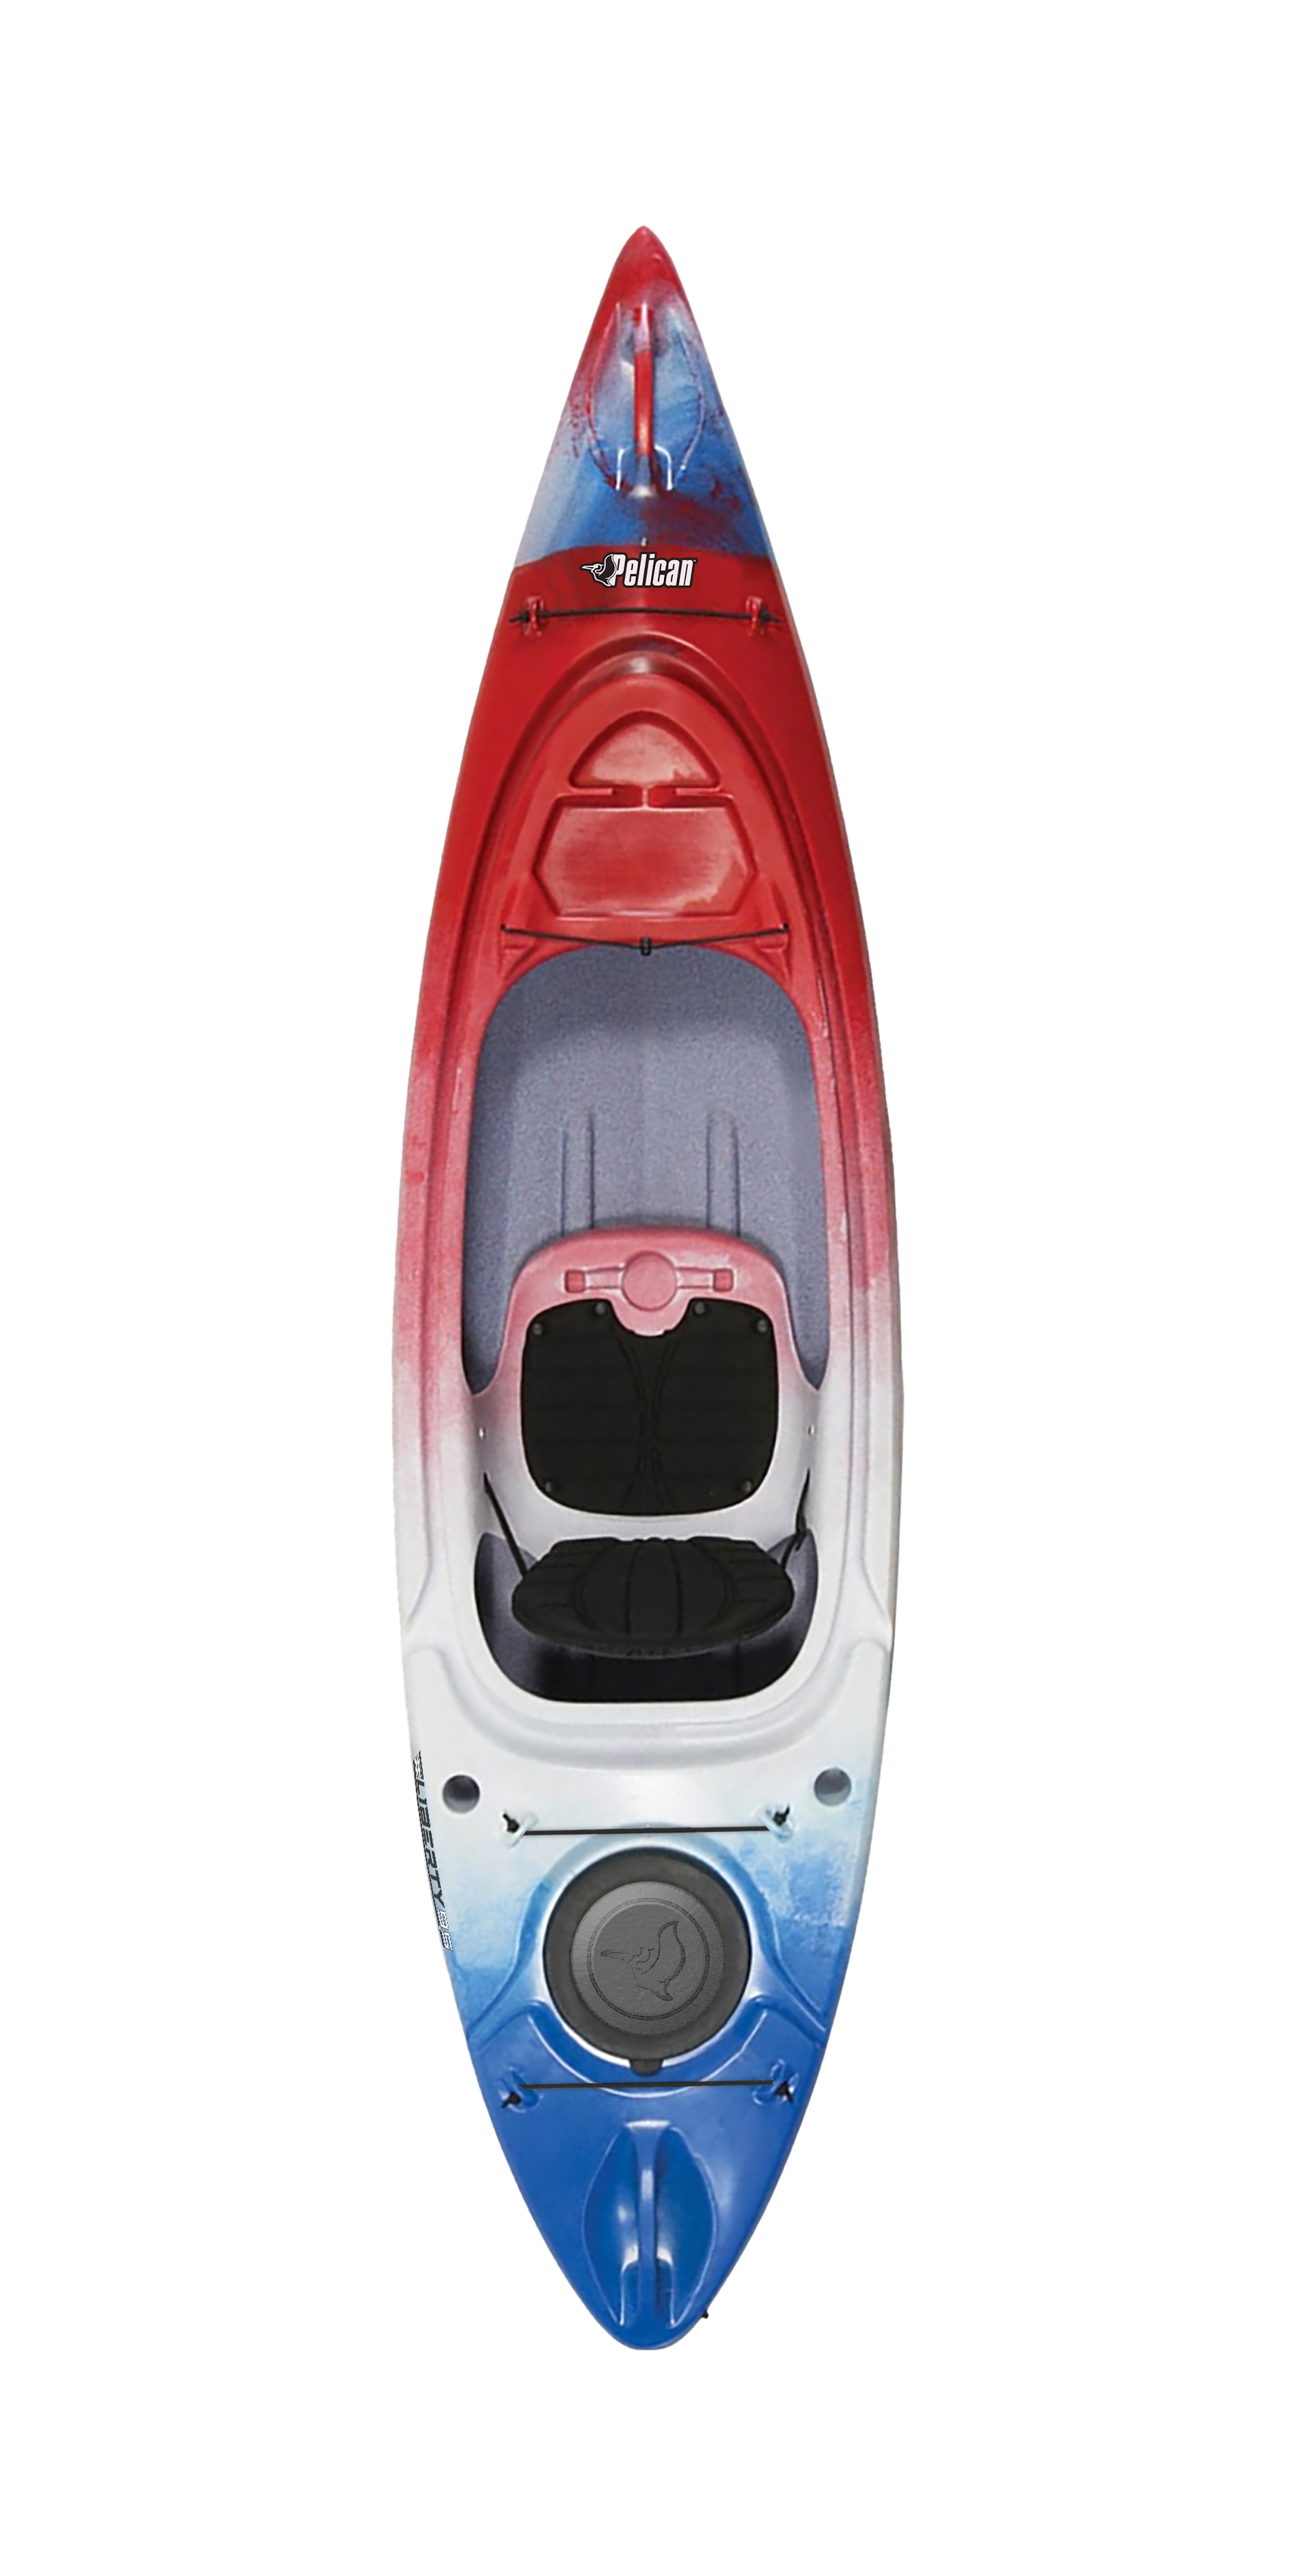 Pelican - Liberty Recreational Kayak - Red White Blue - image 1 of 8